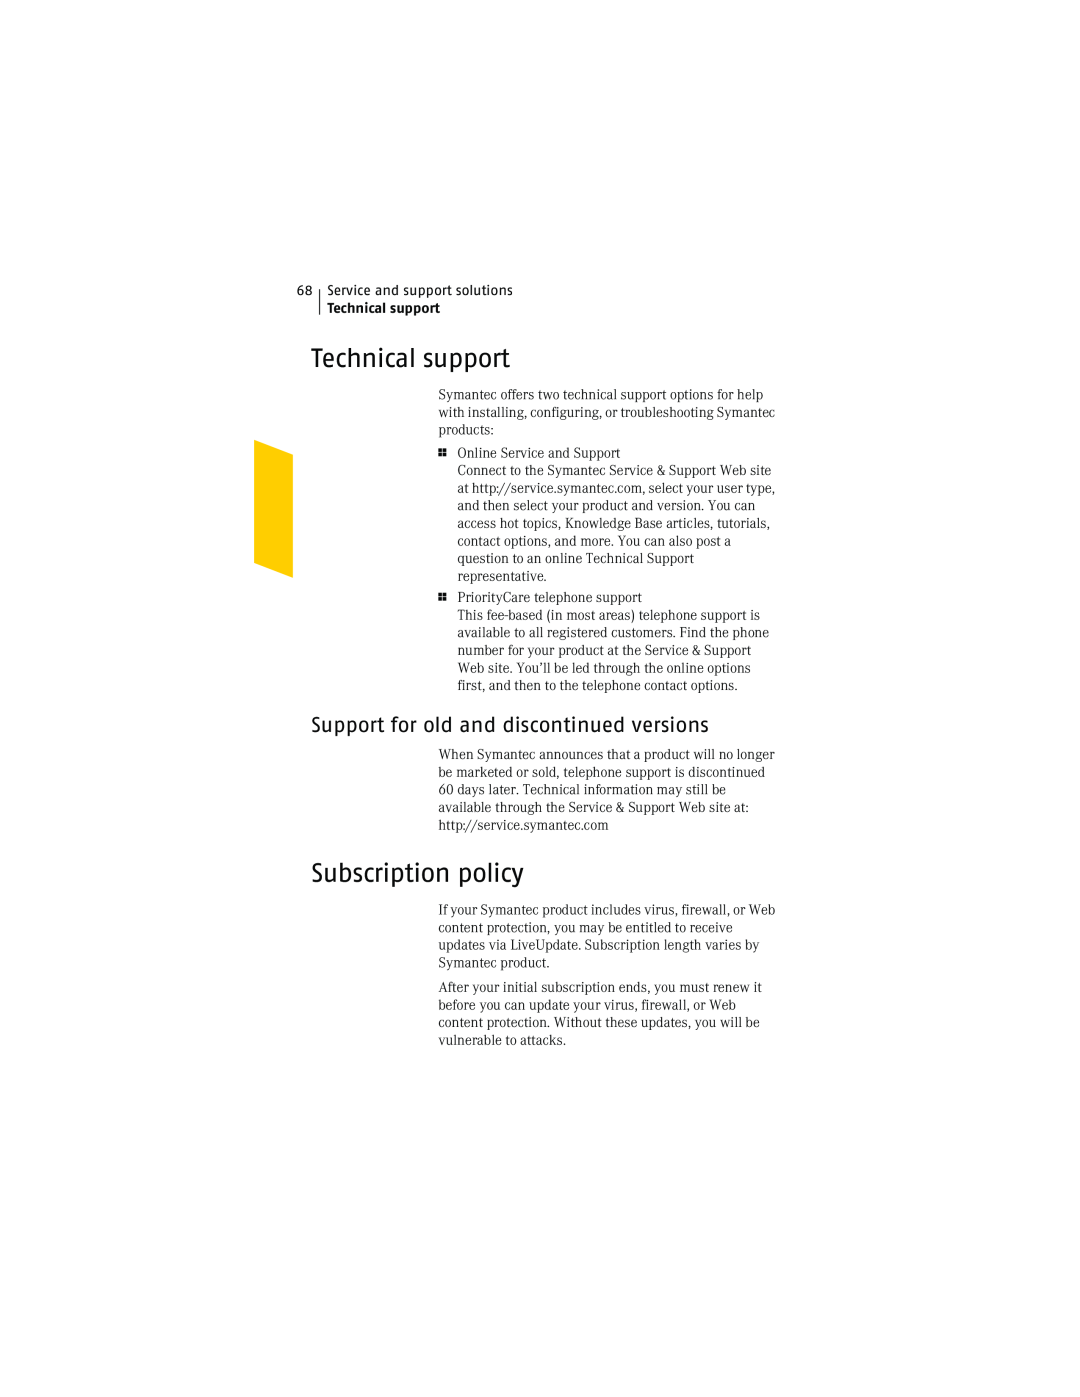 Symantec NIS2005 manual Technical support, Subscription policy, Support for old and discontinued versions 